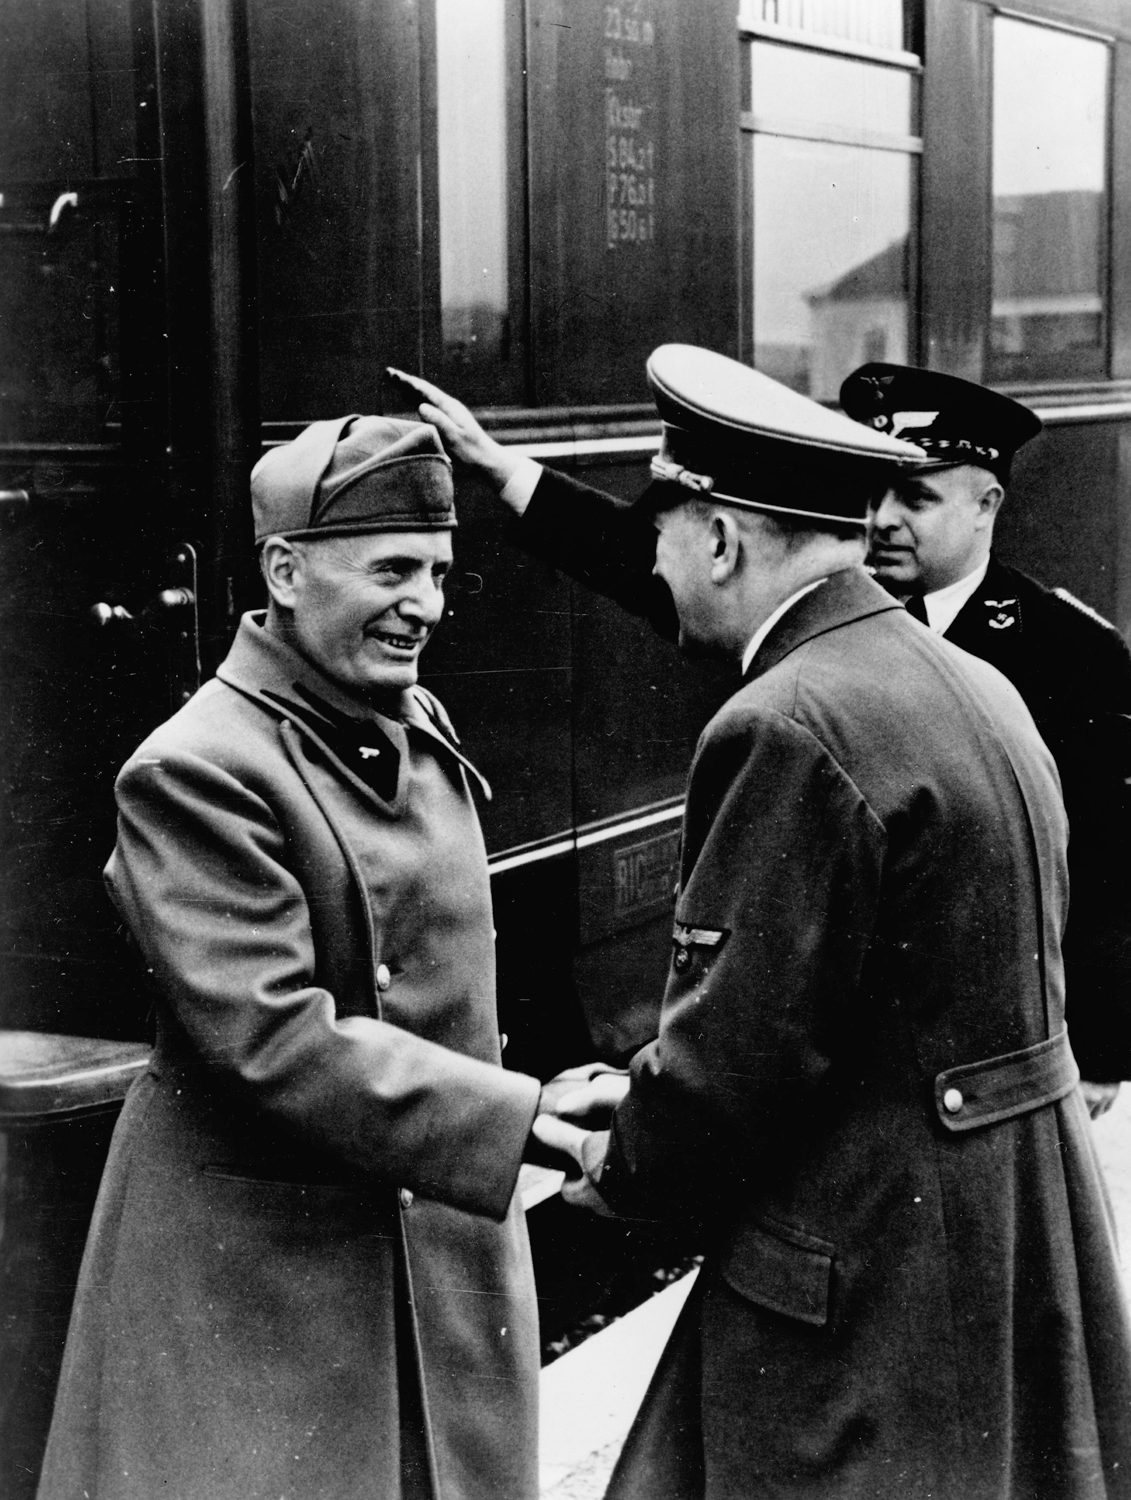 Adolf Hitler greets Benito Mussolini as he arrives at the train station before their meeting at Schloss Kleßheim 